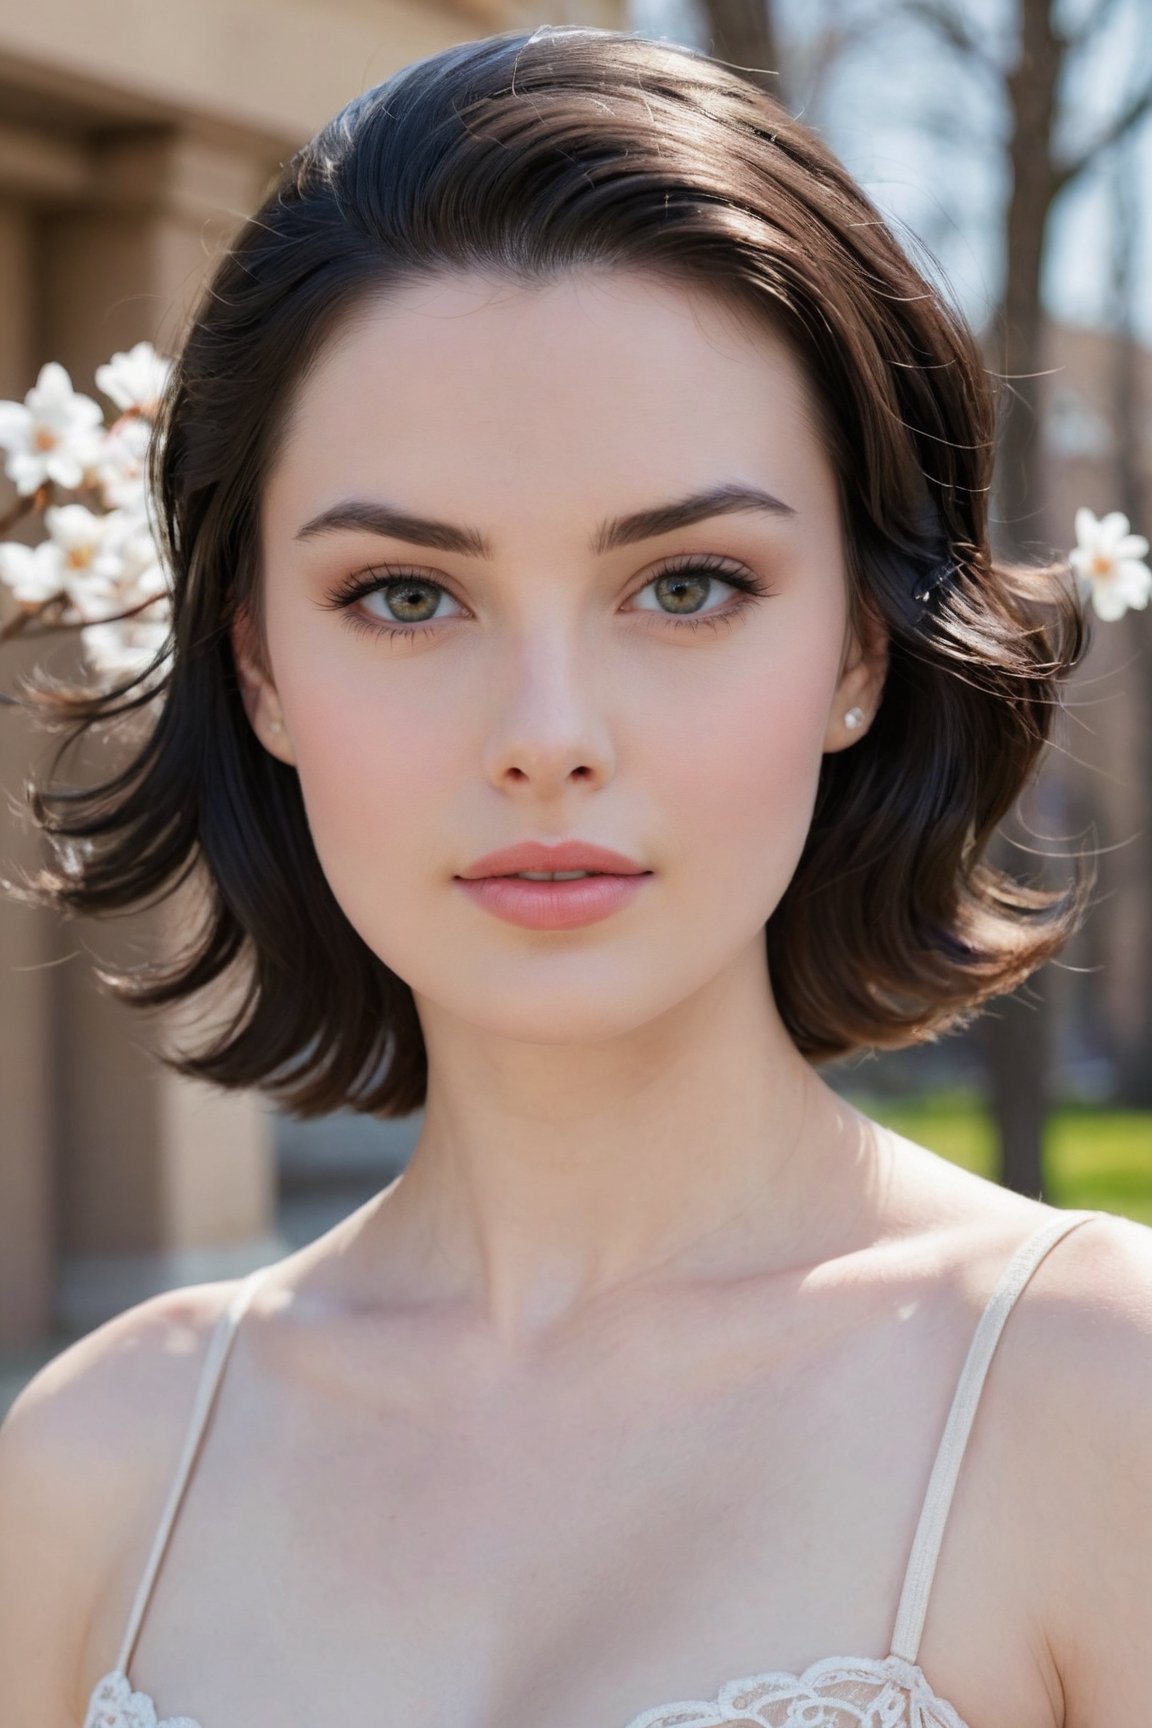 headshot,Nudity,Naked,Nude,No Clothes,Natural black hair,face similar to Grace Kelly,Russian,pale skin,Layers Hairstyle,Dramatic makeup,21 year old,Boyish_normal_breasts,headshot,Sunny Day Spring,Posing for a photo
